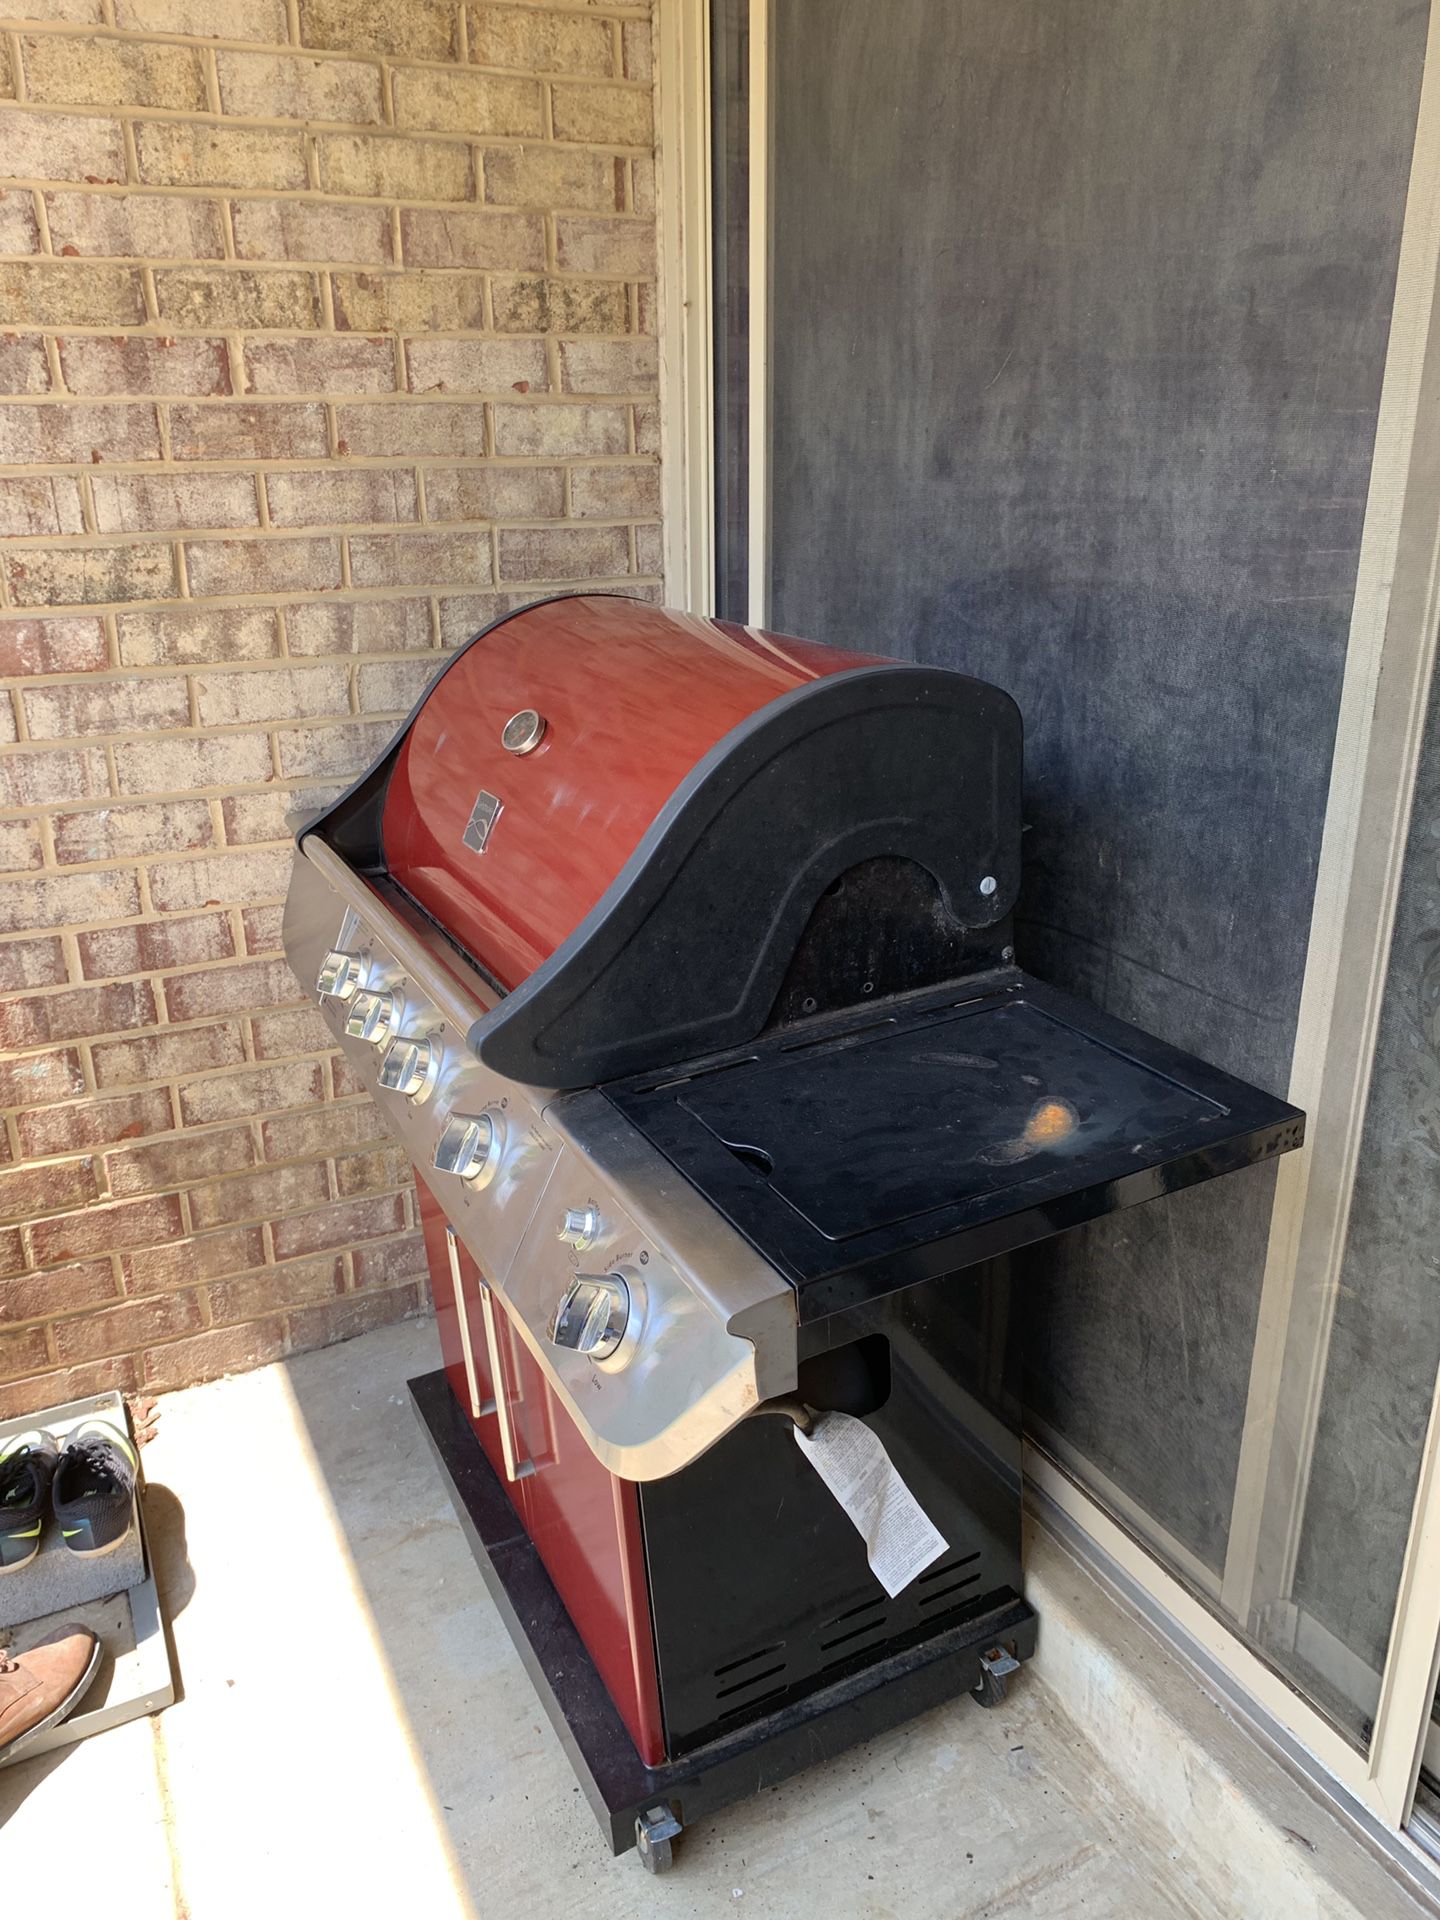 Reliable gas Grill. Works well at a great price.